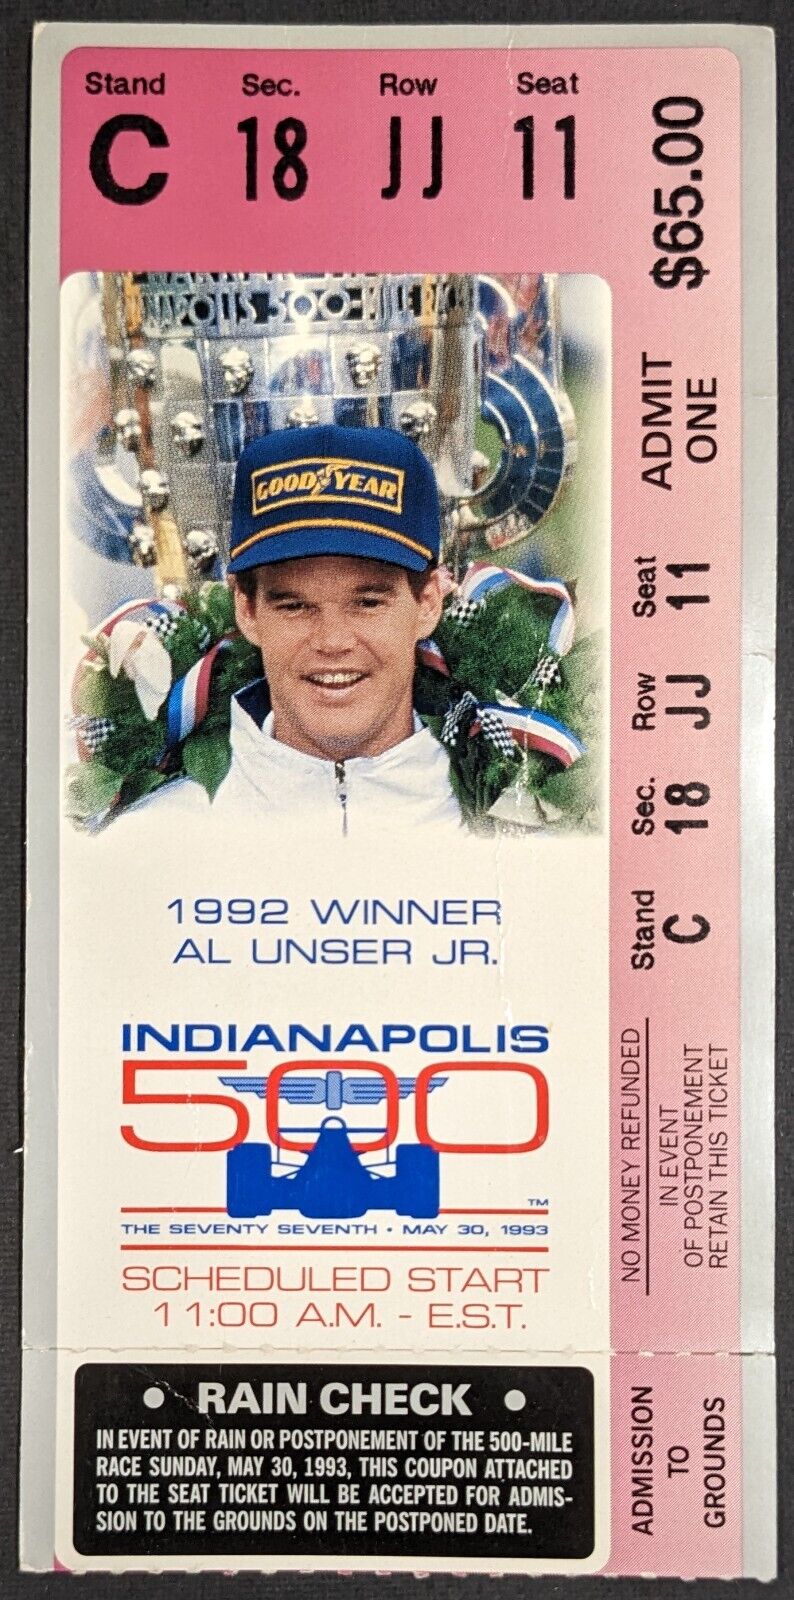 1993 Indy 500 Racing Ticket Al Unser Jr. Pictured Indianapolis Fittipaldi Wins